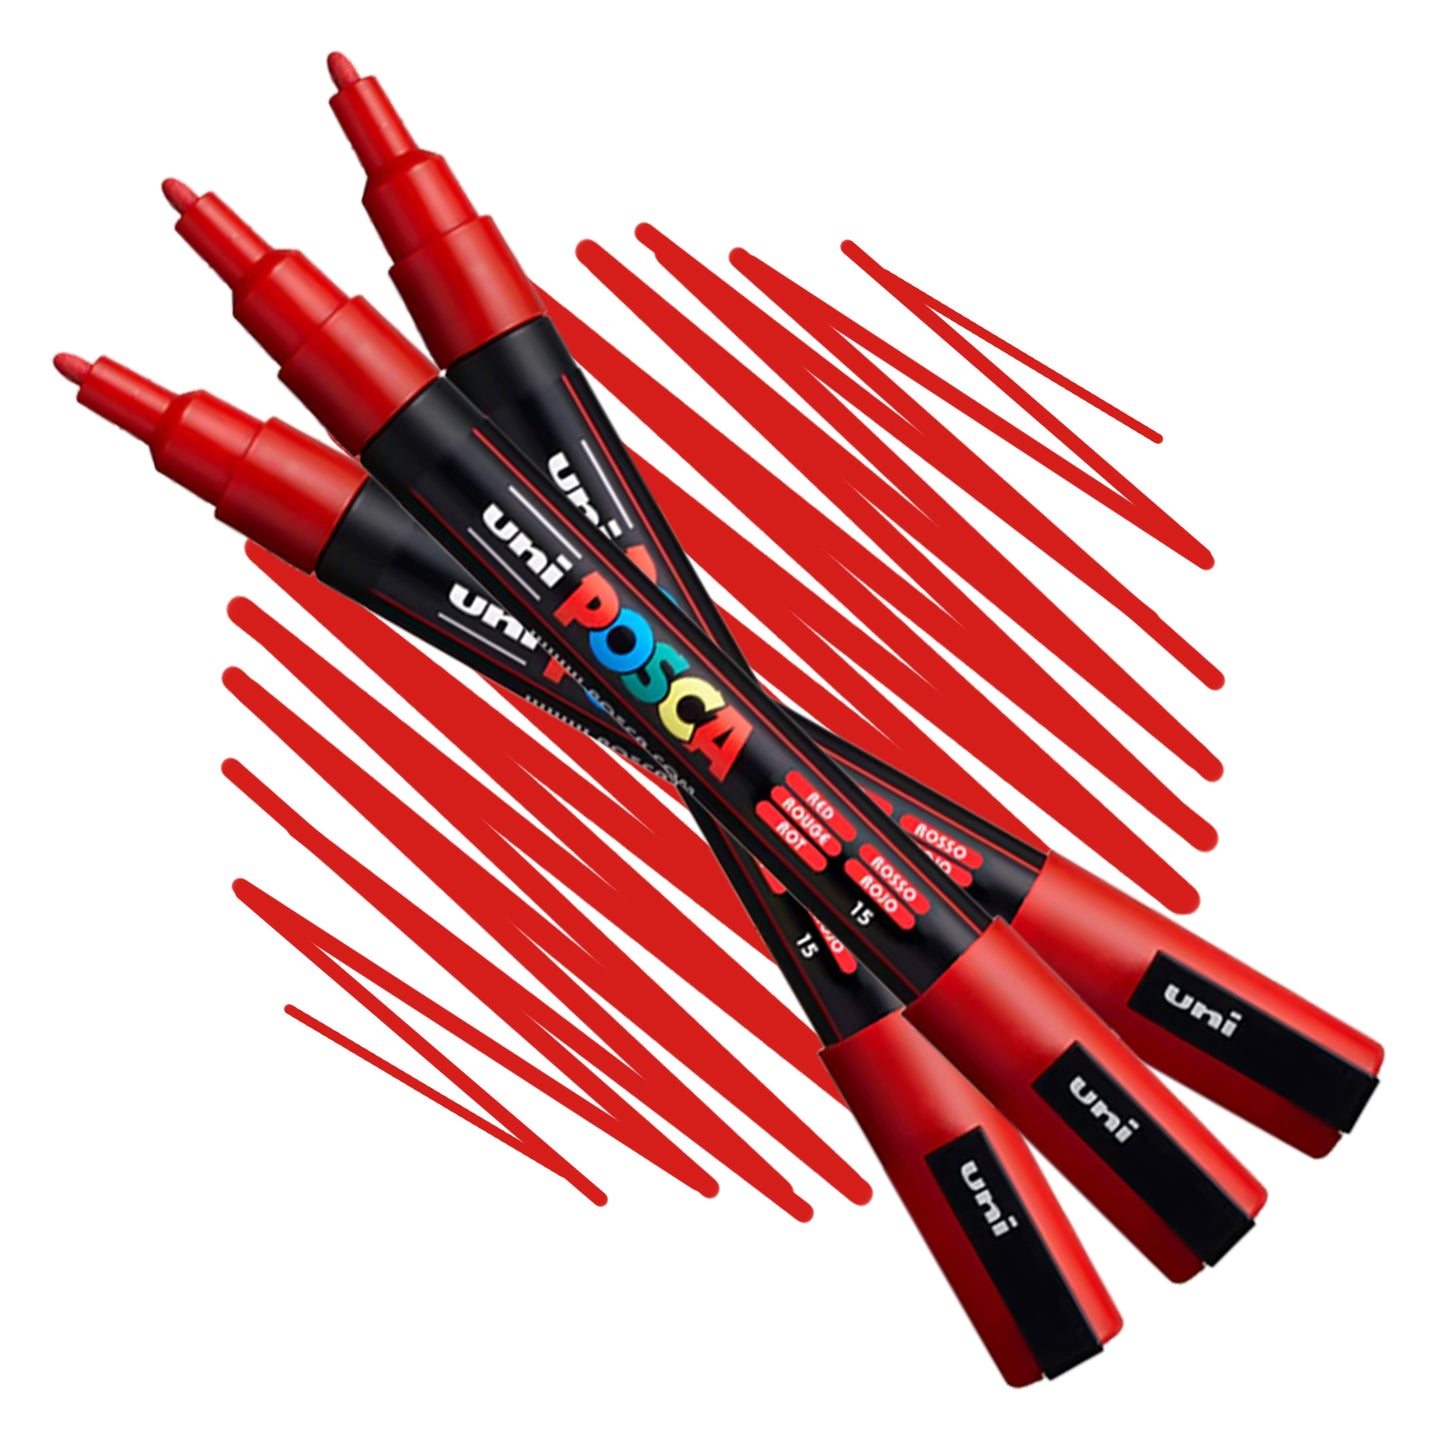 POSCA water-based artist paint markers 3M size in red